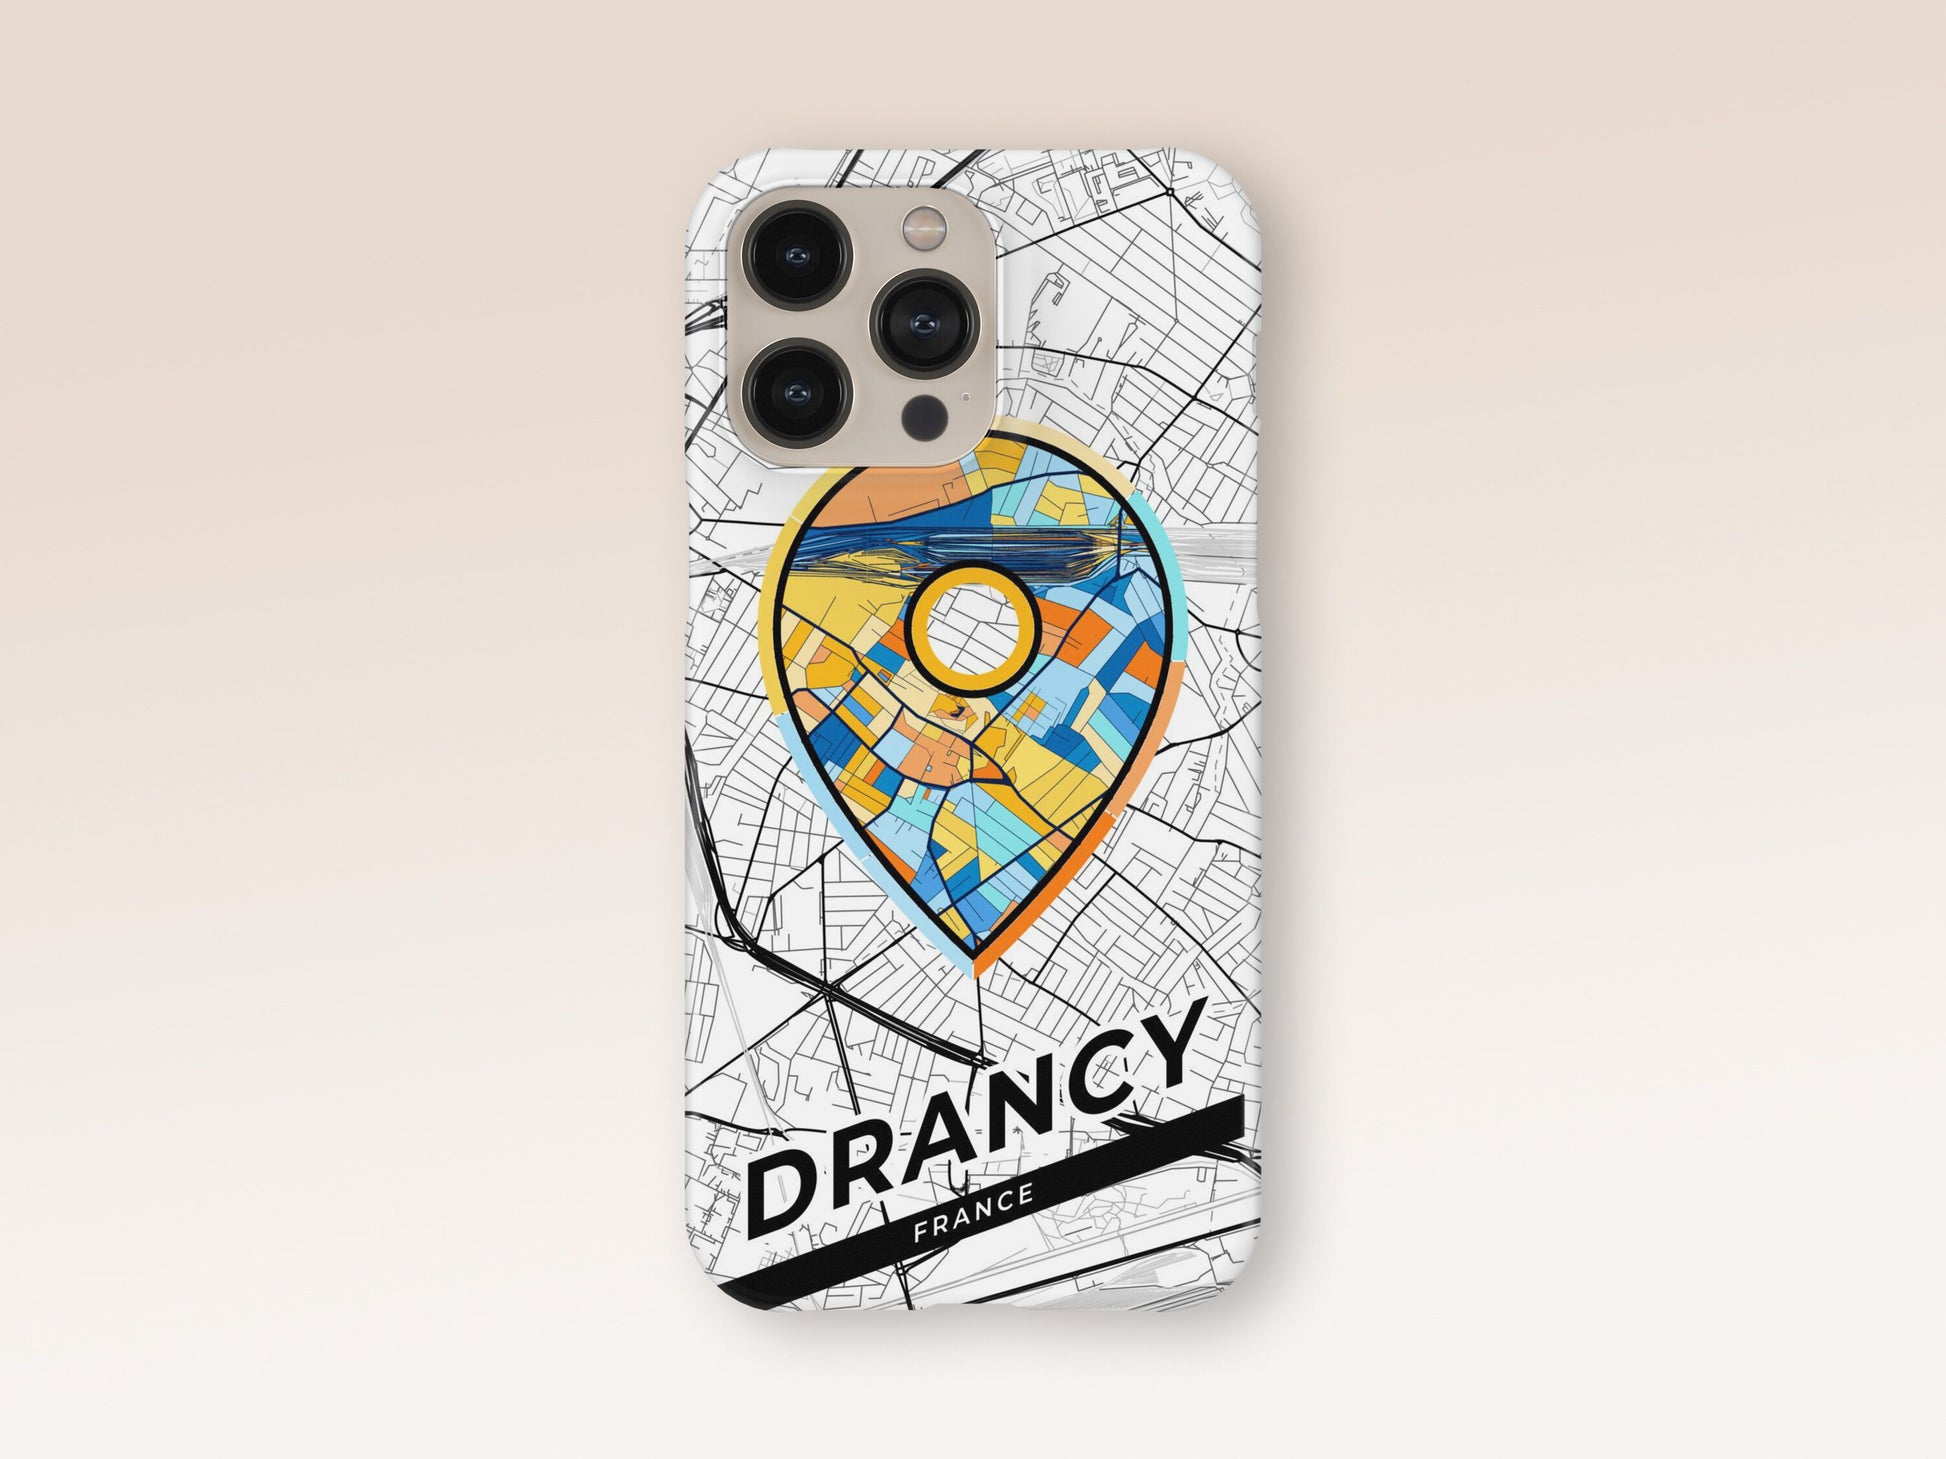 Drancy France slim phone case with colorful icon. Birthday, wedding or housewarming gift. Couple match cases. 1